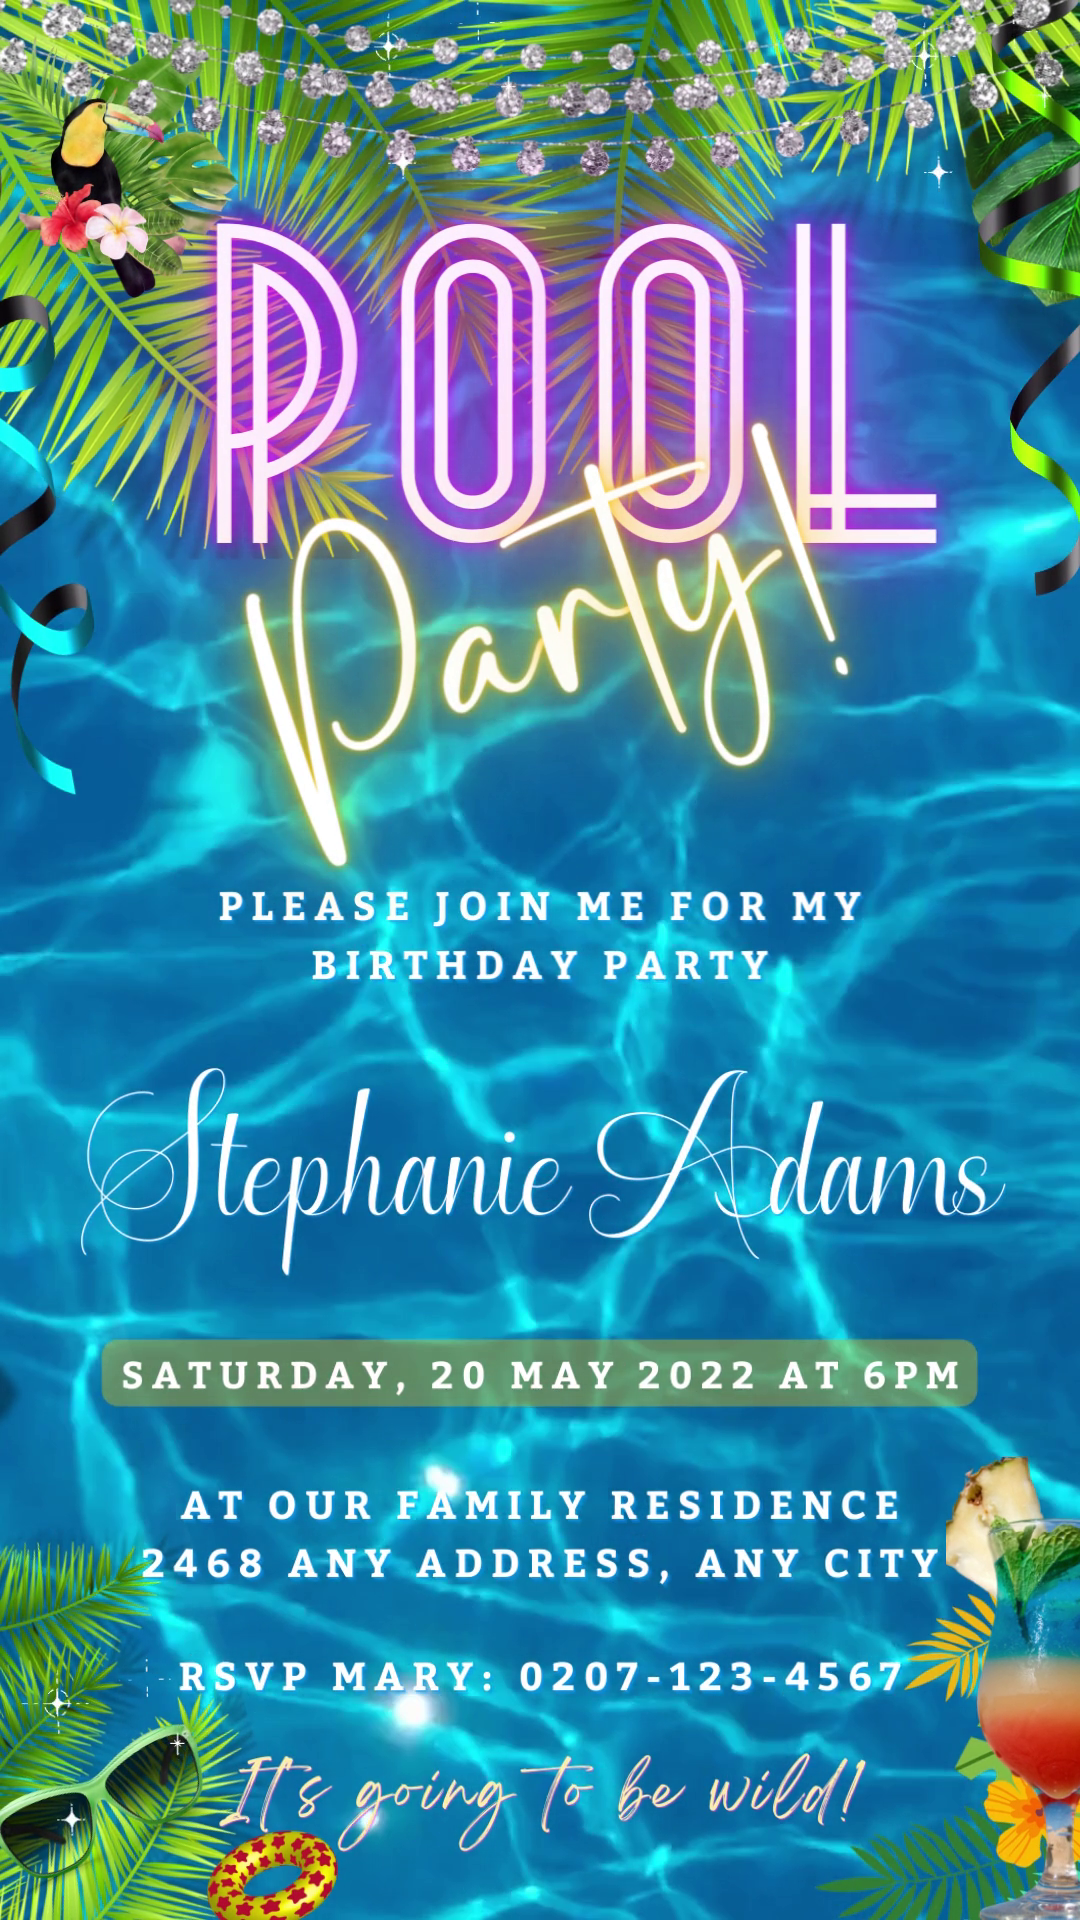 Blue Water Pool Party Video Invitation with colorful text and streamers, customizable via Canva for easy event personalization and electronic sharing.